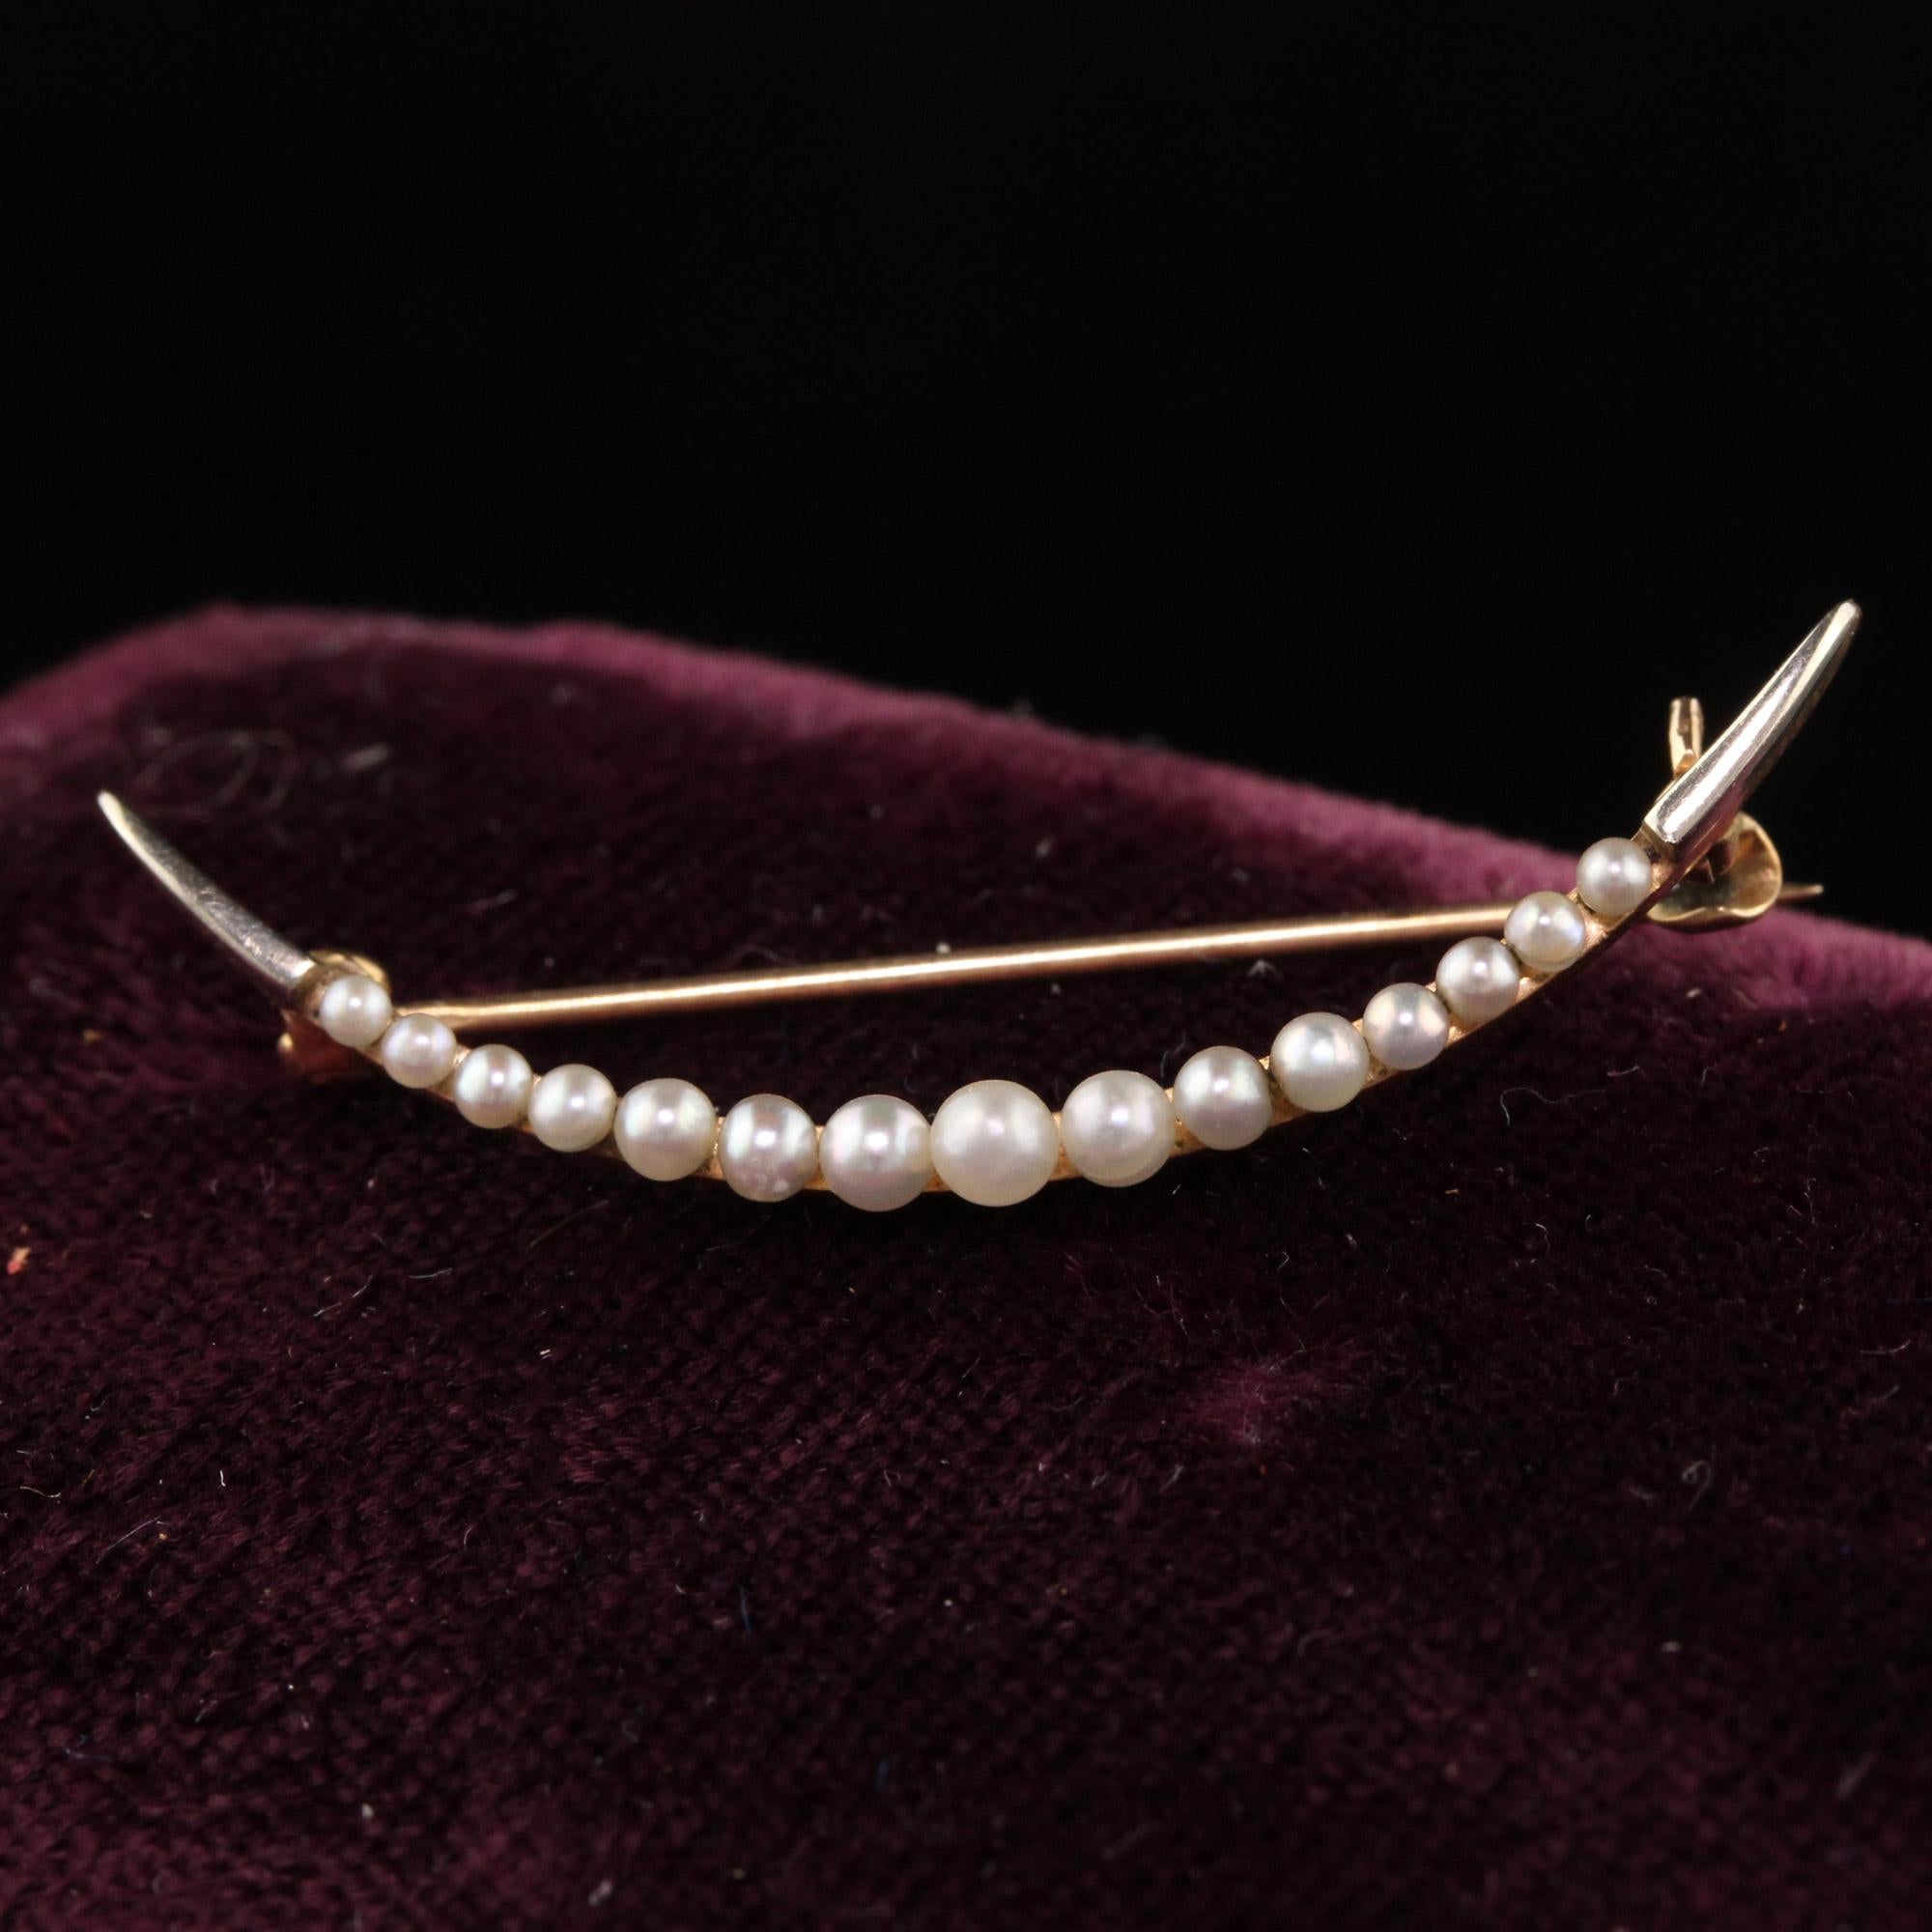 Beautiful Antique Art Deco 14K Yellow Gold Natural Pearl Crescent Pin. This gorgeous piece is crafted in 14k yellow gold. The pin has natural pearls across the front of the pin and is in great condition. This can also be converted to a necklace if